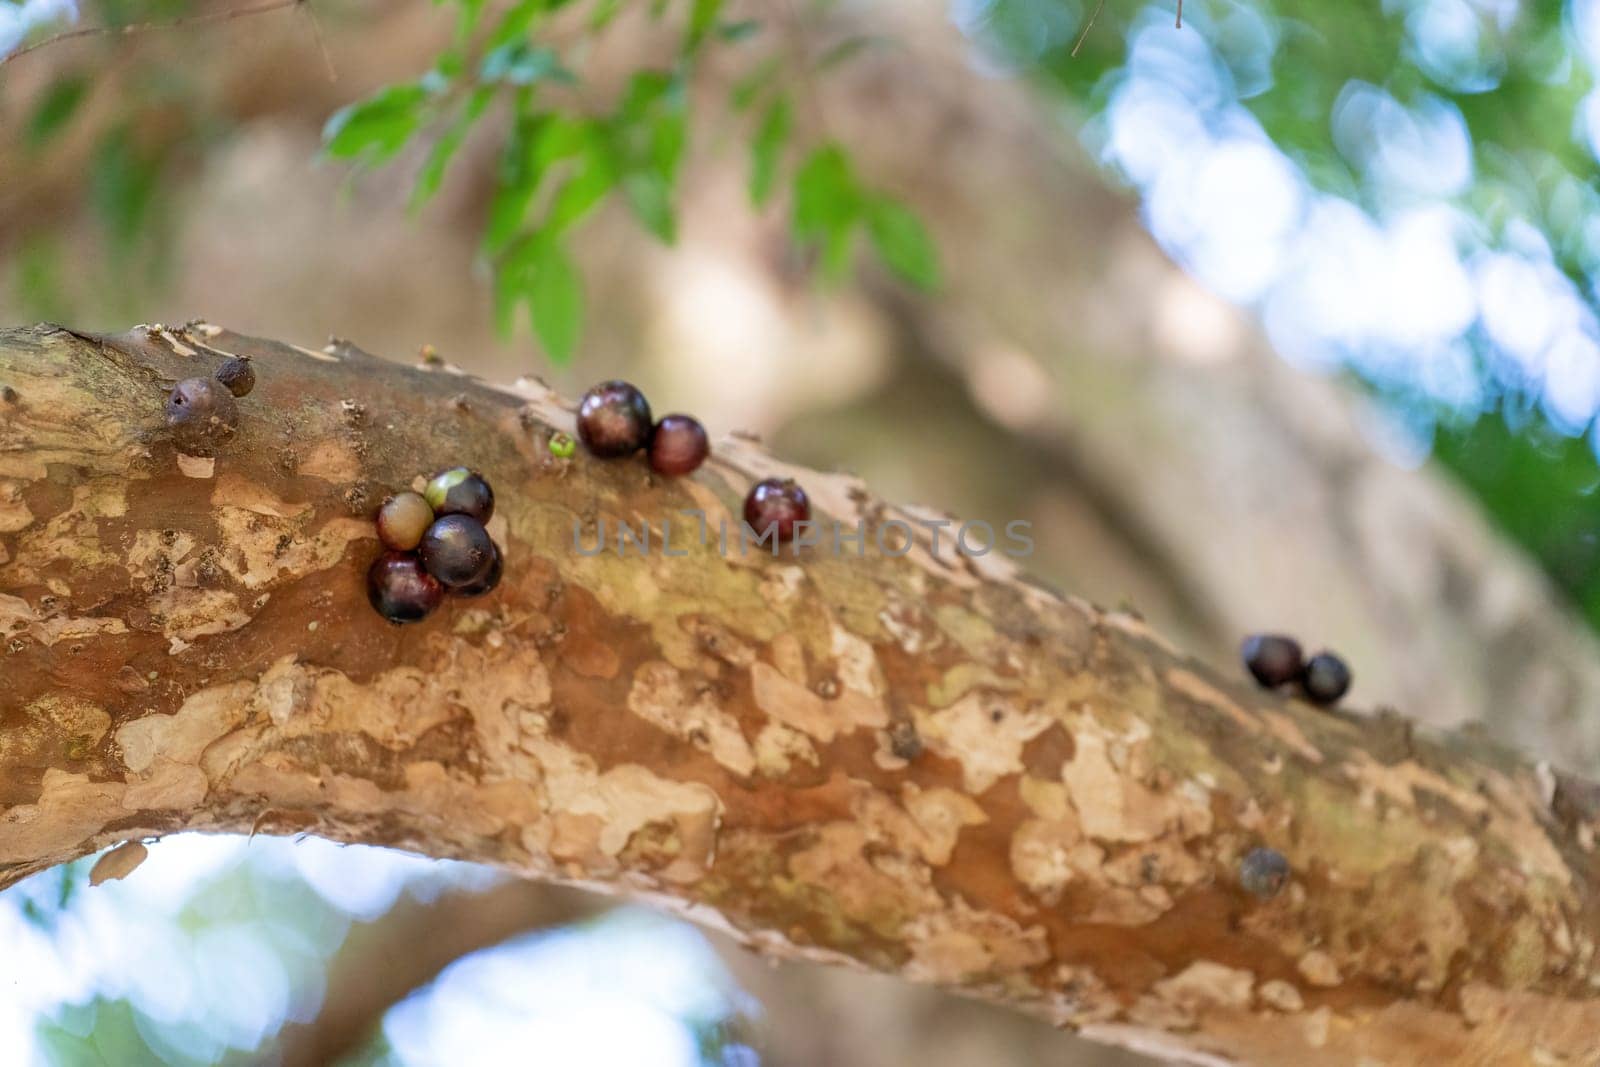 A close-up view of a Jabuticaba tree showing the unique way in which its fruits grow directly from the trunk.